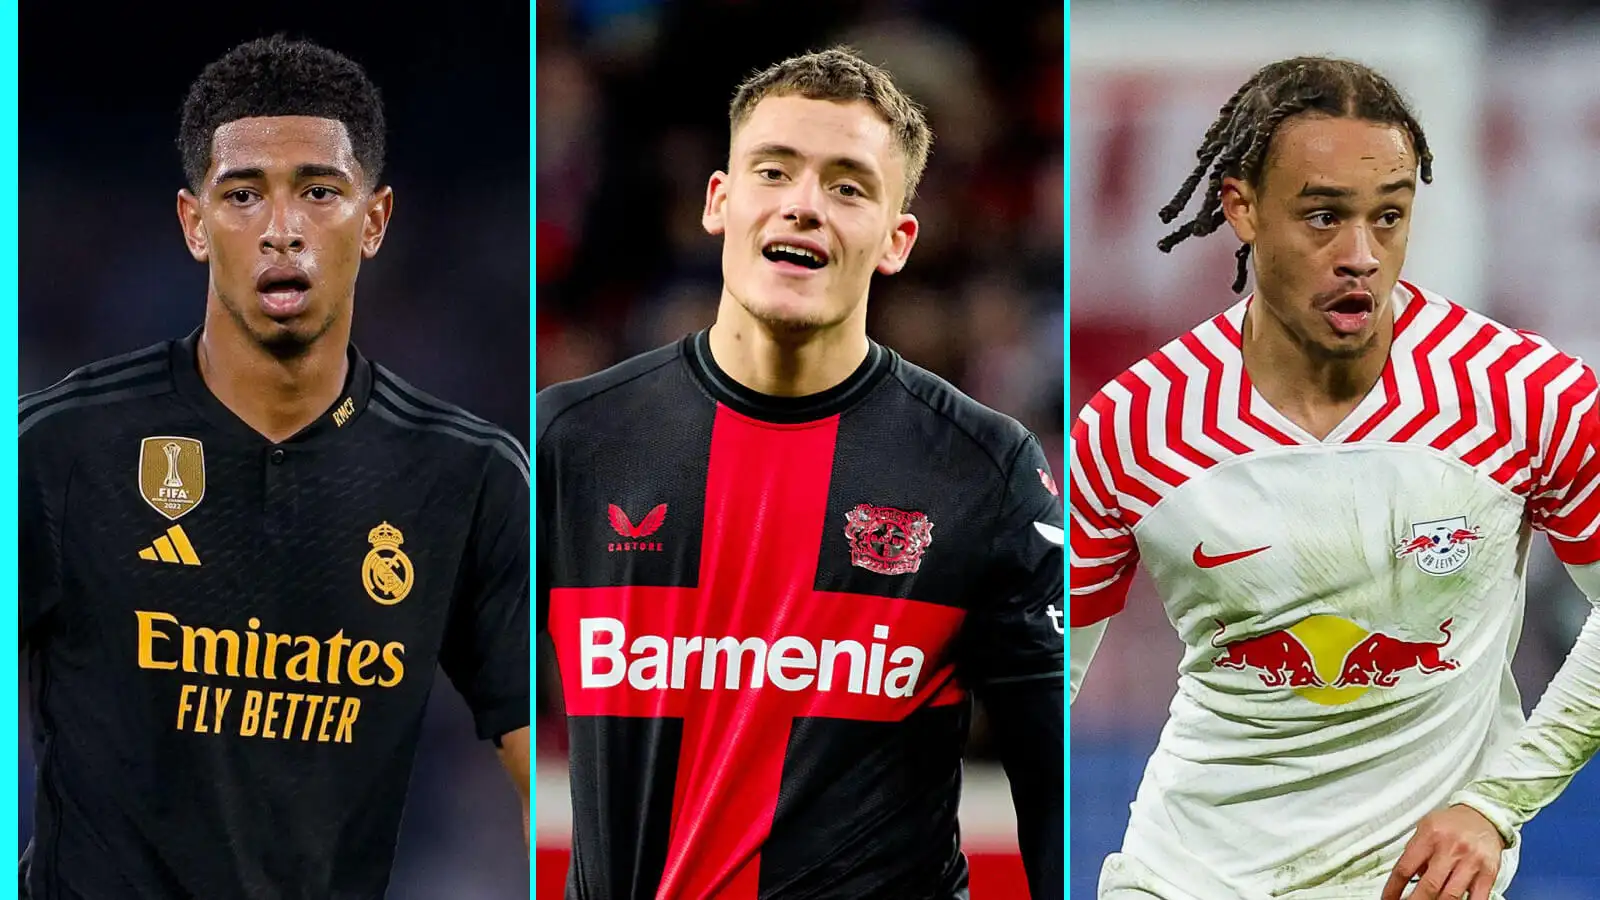 England’s biggest hope still leads Europe’s top 10 Under-21 stars